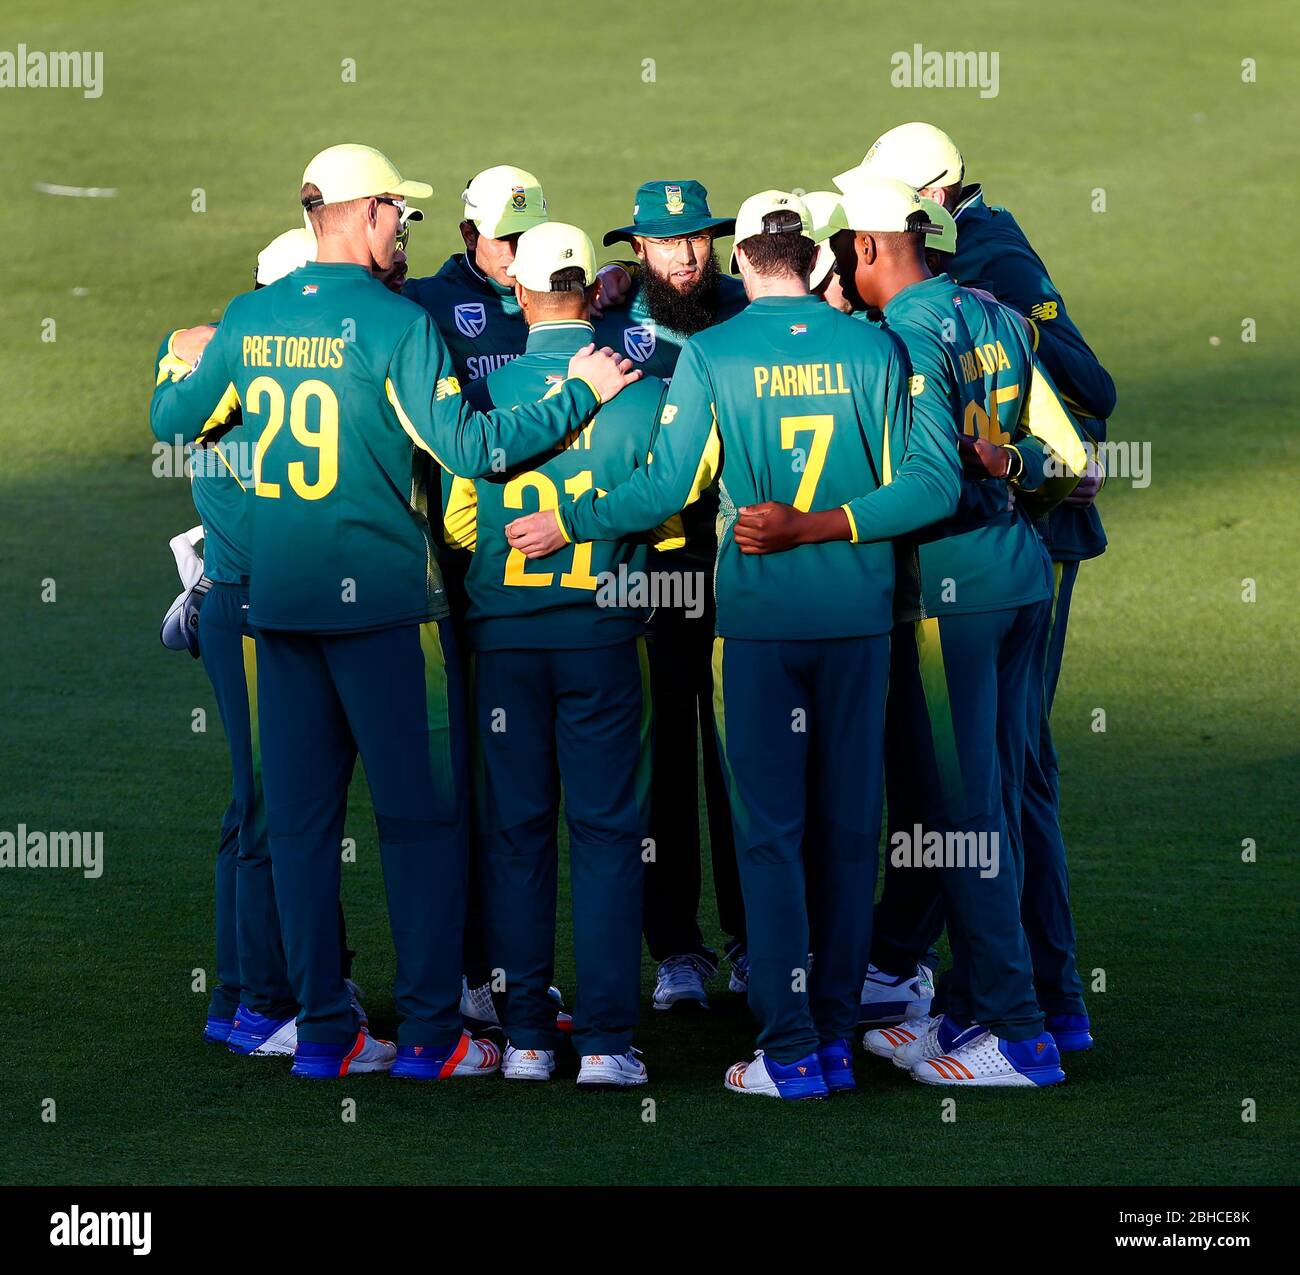 South Africa have a team huddle in-between innings during the Tour Match between Sussex and South Africa at The 1st Central County Ground in Hove. 19 May 2017 Stock Photo